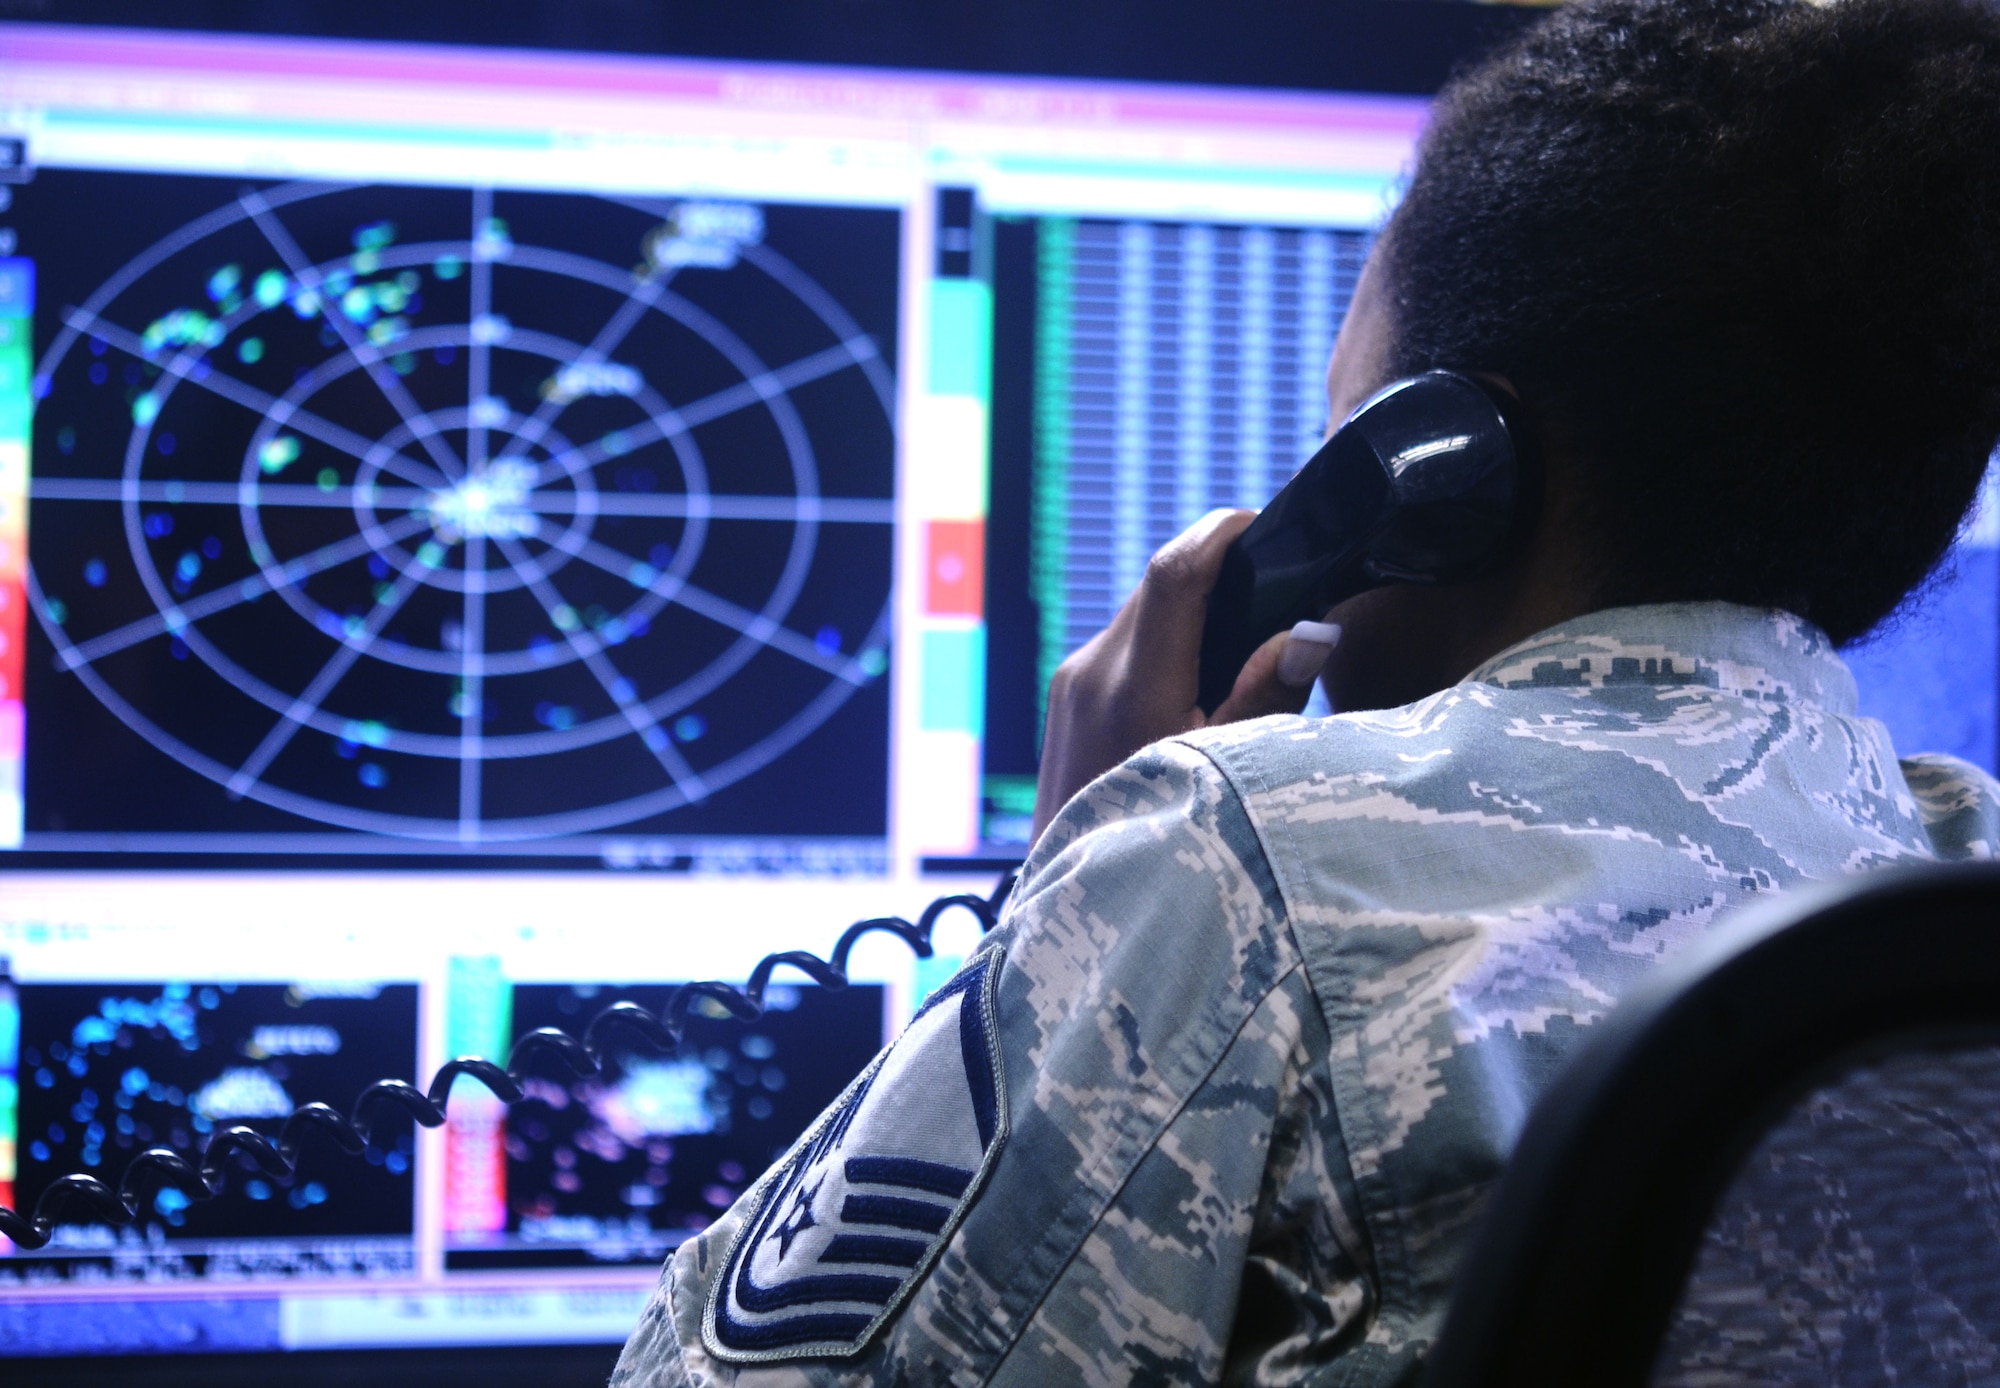 Master Sgt. Vernee White, 36th Operations Group mission weather element NCO in charge, observes incoming weather patterns and relays her information to pilots on Andersen Air Force Base, Guam, July 16, 2013. The element tracks weather conditions on Guam to ensure the safety of all flight crews flying through air space surrounding Andersen. (U.S. Air Force photo by Airman 1st Class Mariah Haddenham/Released)